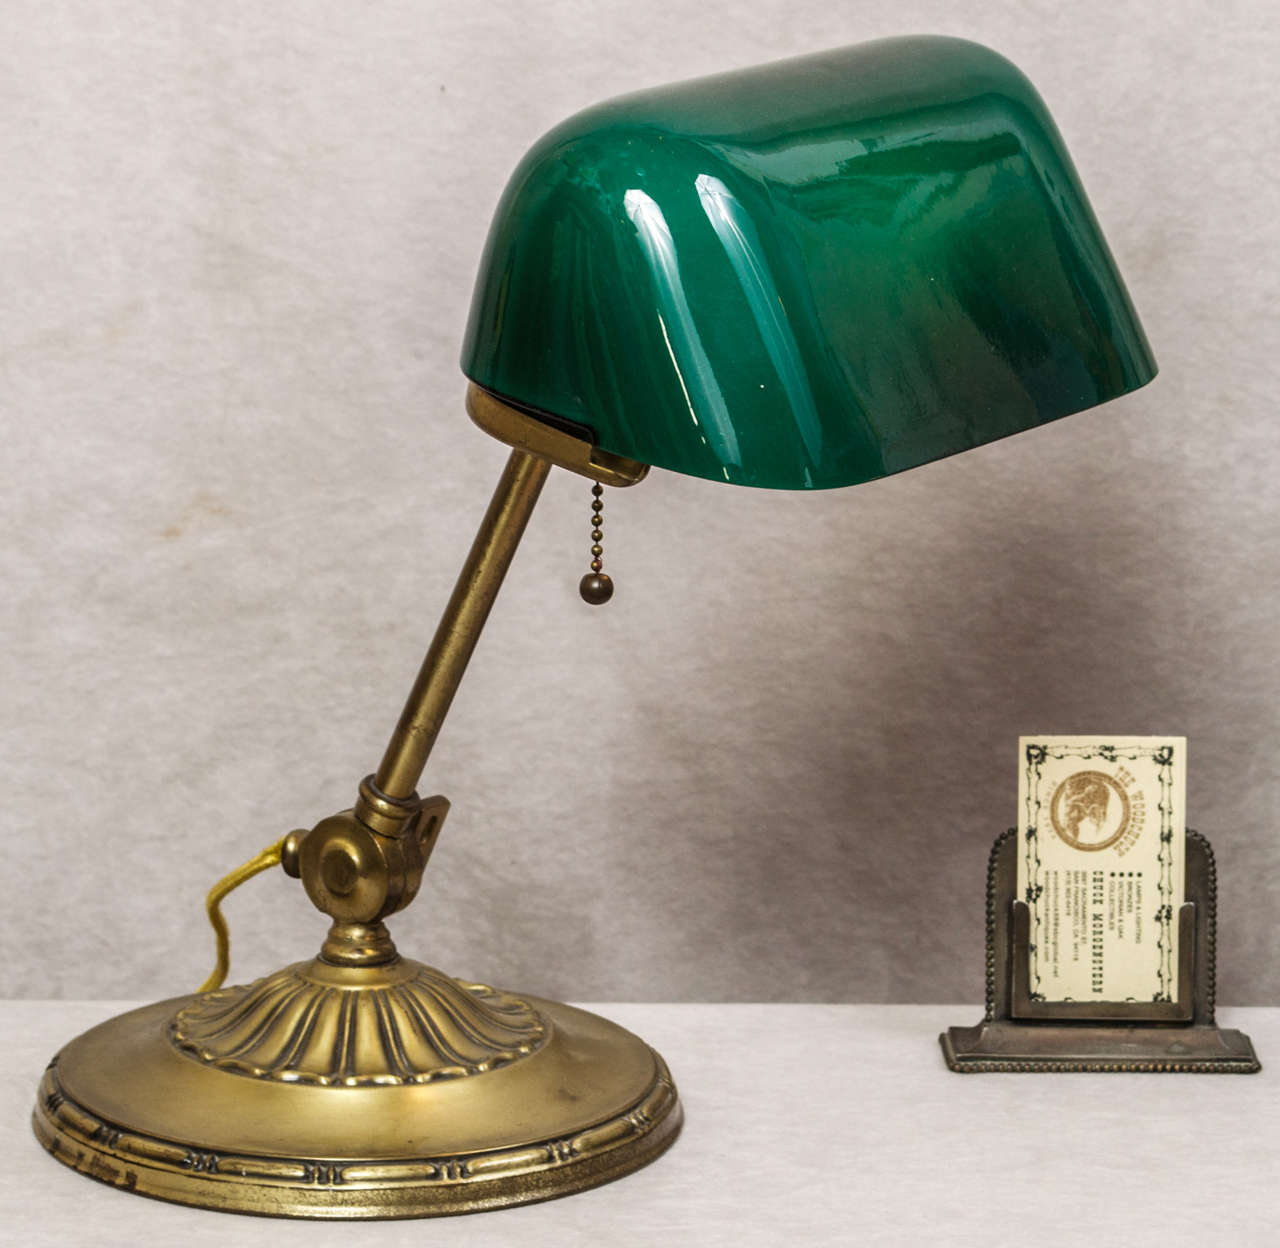 Here is a very fine example of the highly sought after desk lamp for the professional or student.  This particular model was made by the most famous maker of these lamps, Emeralite.  It is signed and does have the original shade, which is also